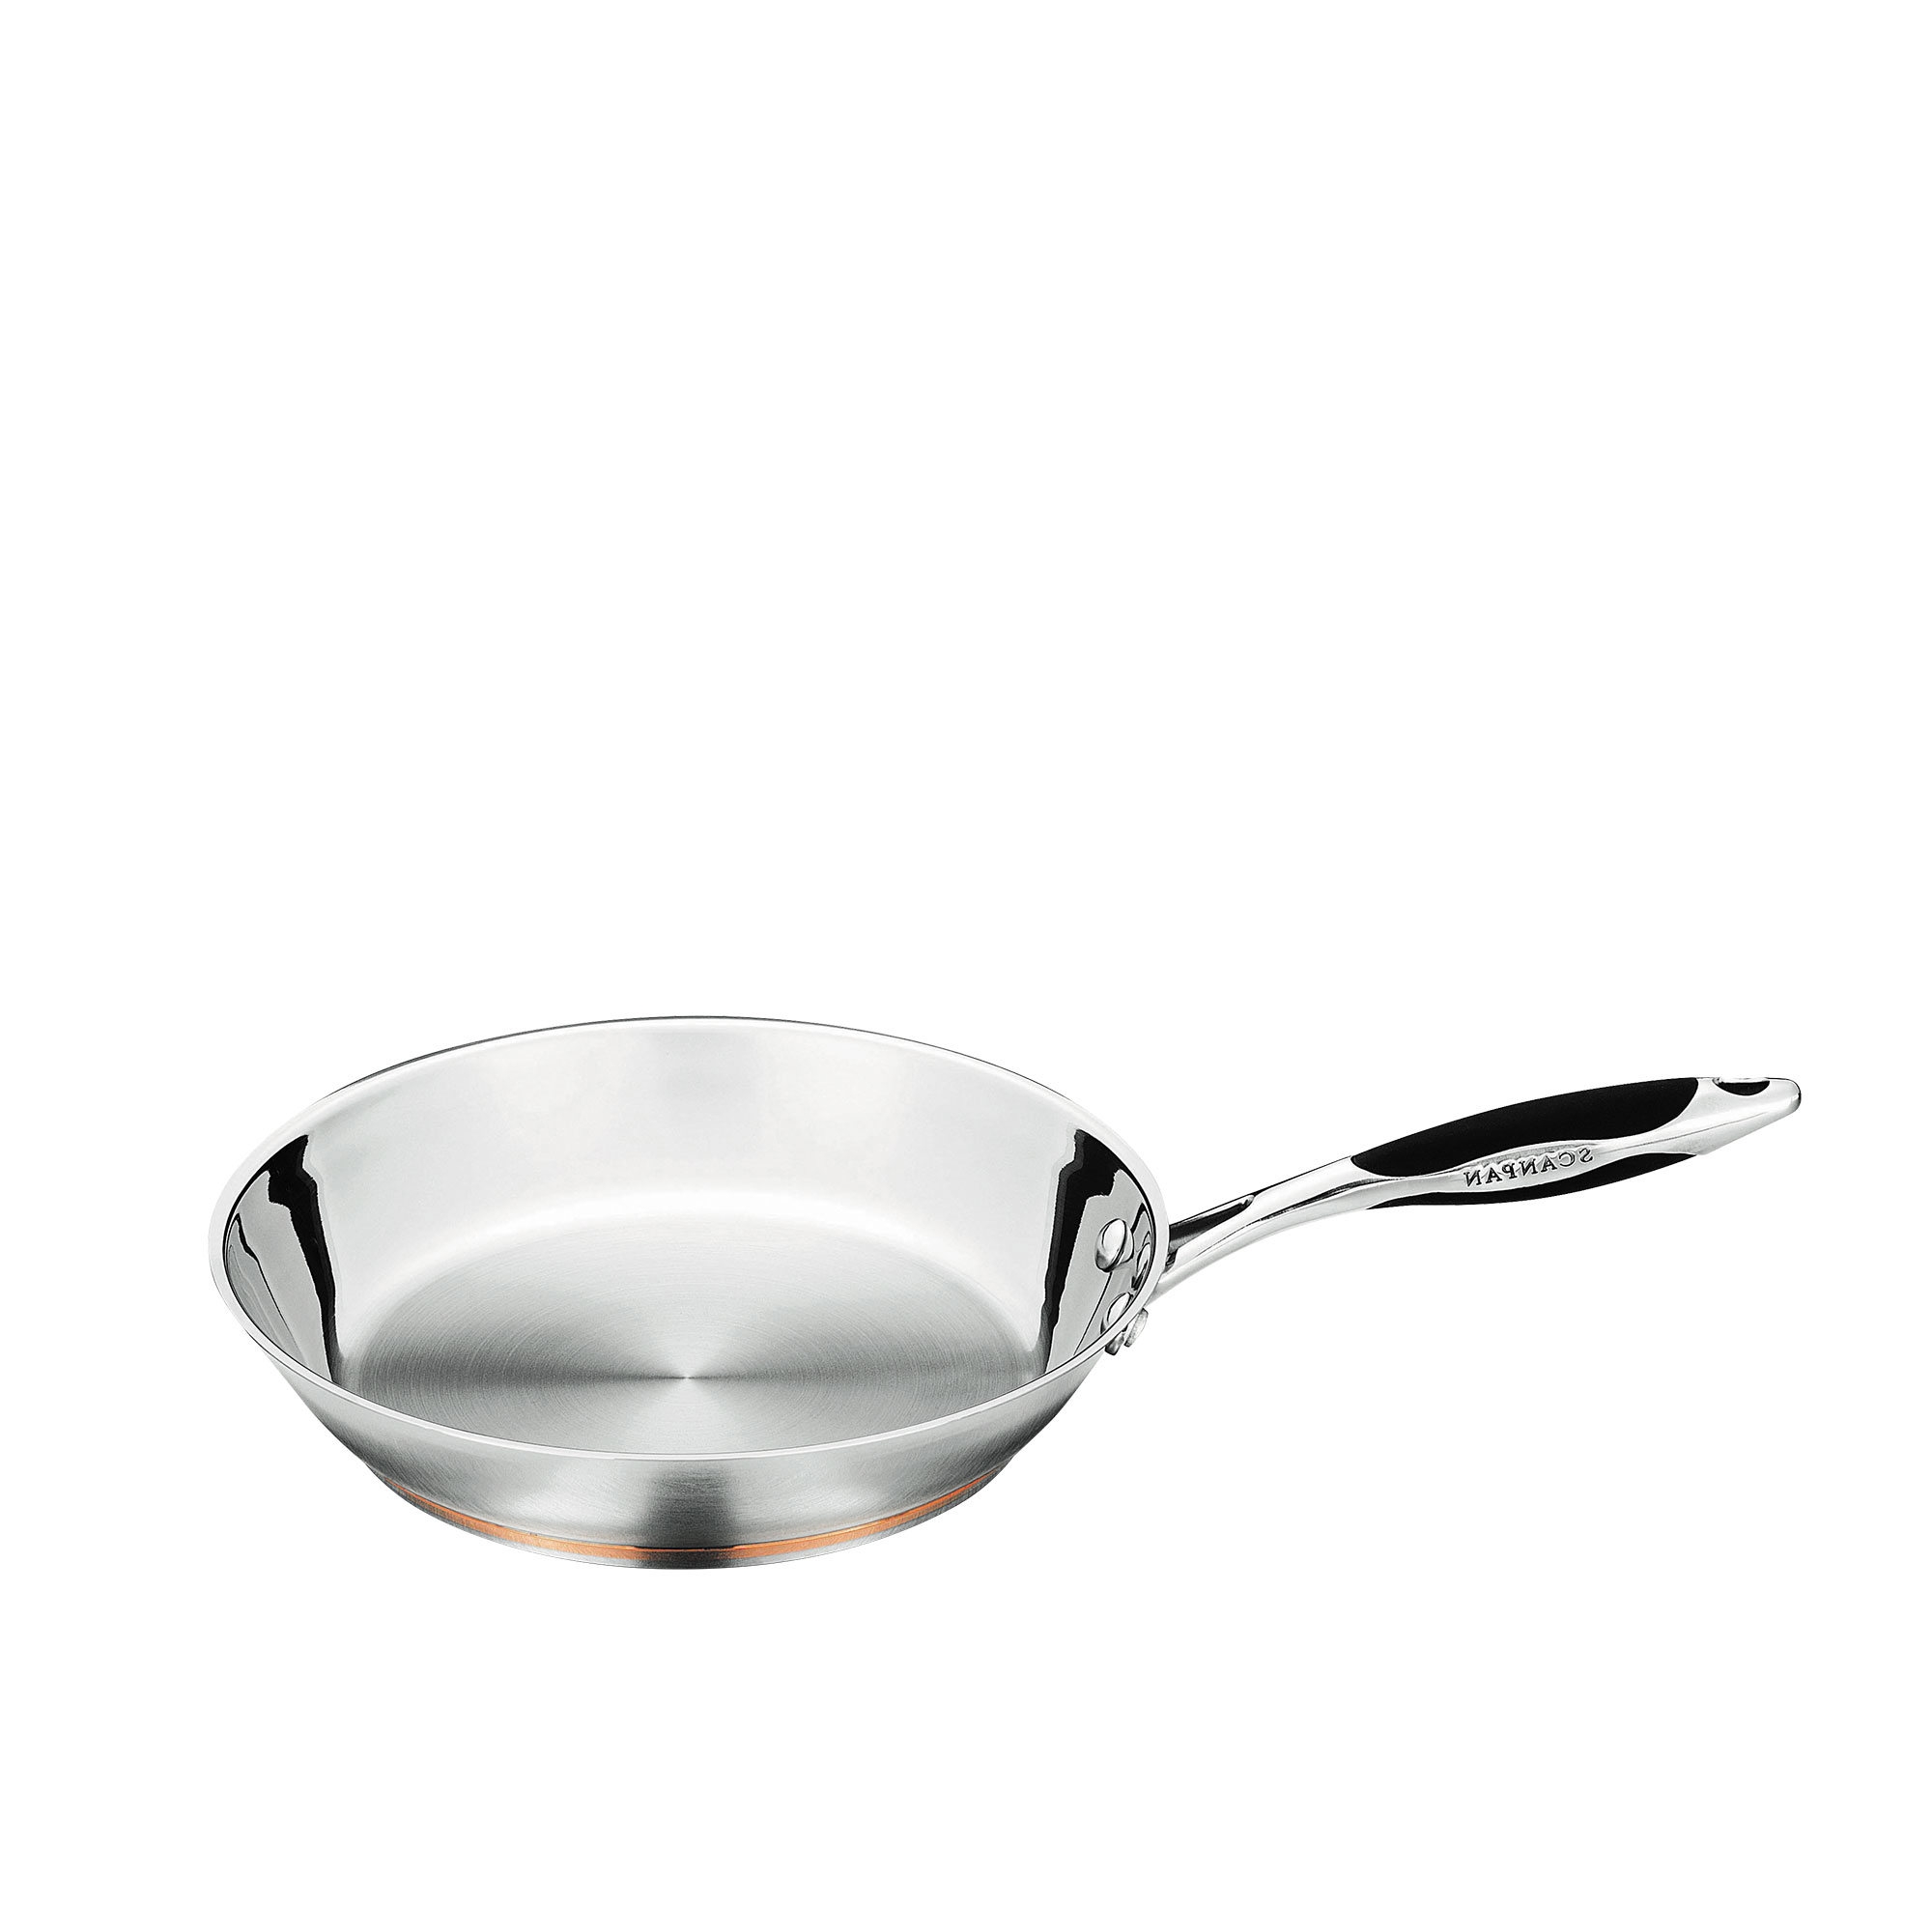 Scanpan Coppernox Stainless Steel Frypan 28cm Image 1